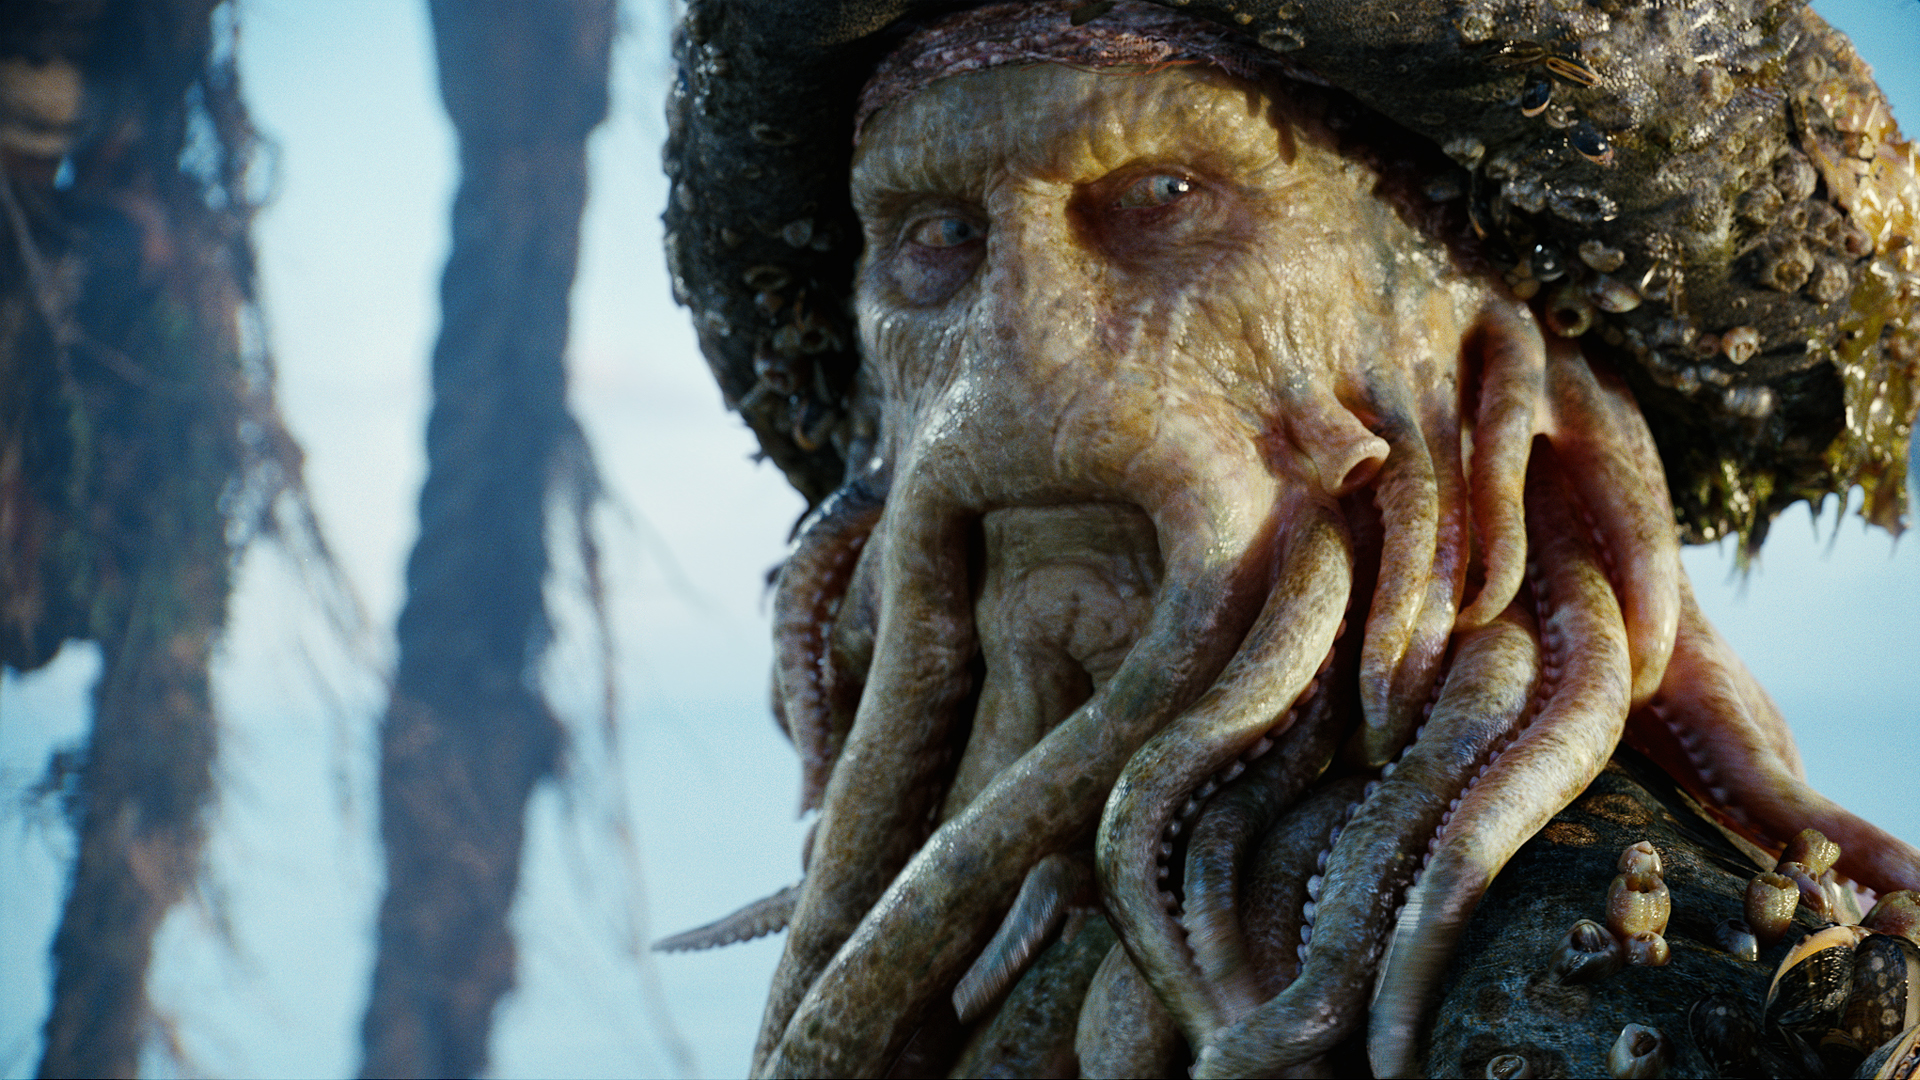 Davy Jones (Bill Nighy) marks a breakthrough for on-set performance capture in the Academy Award®-winning Pirates of the Caribbean: Dead Man’s Chest. © Jerry Bruckheimer Films. All Rights Reserved.